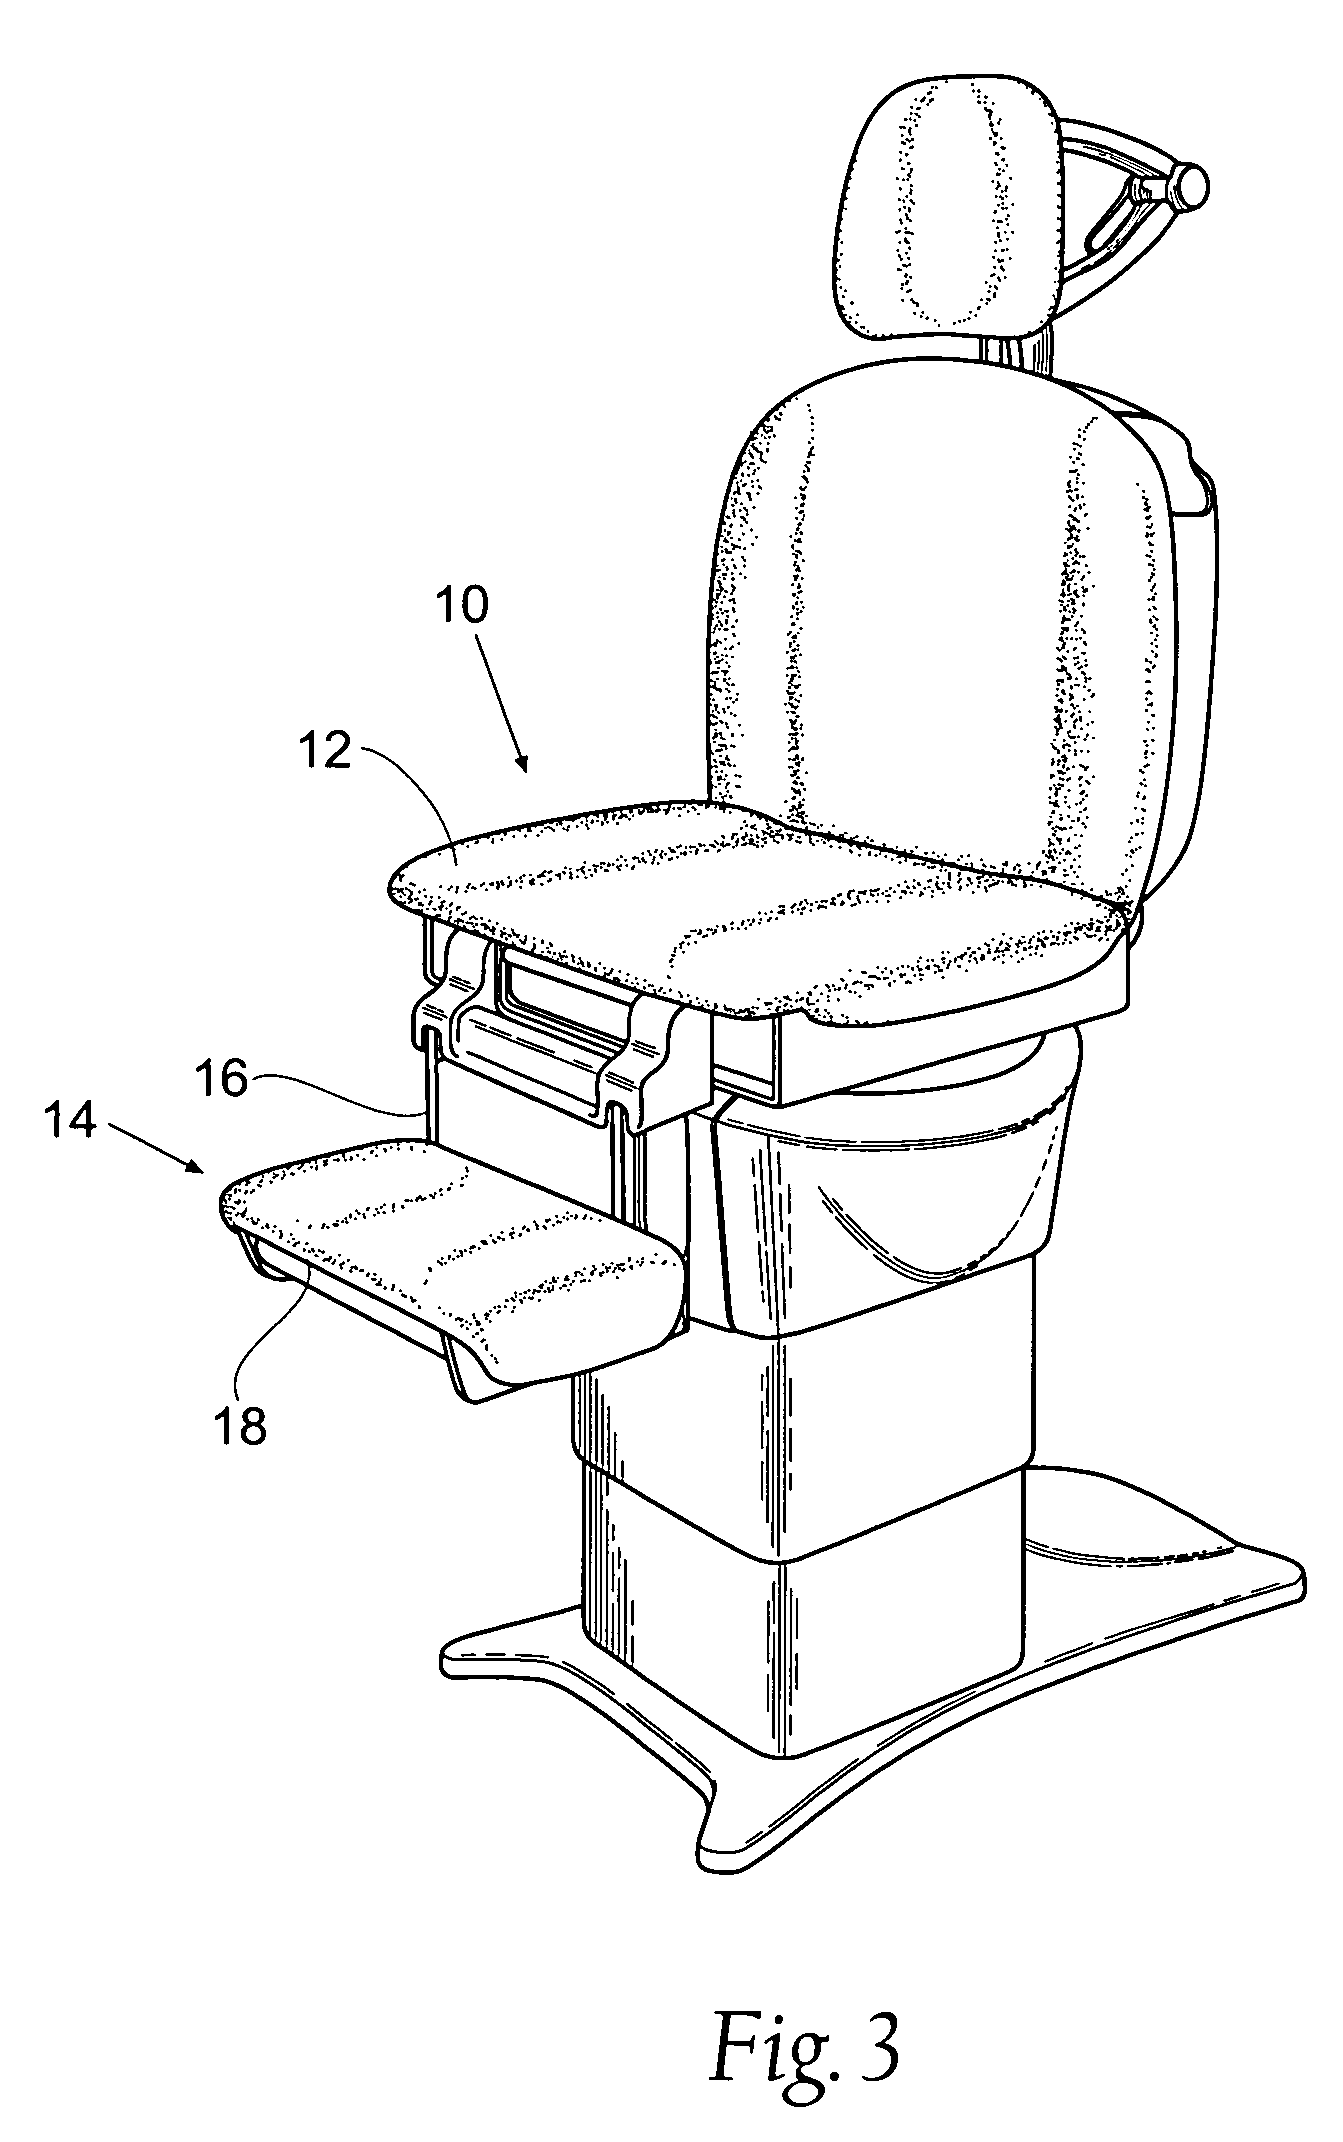 Leg rest and kneeler assembly for a medical examination table